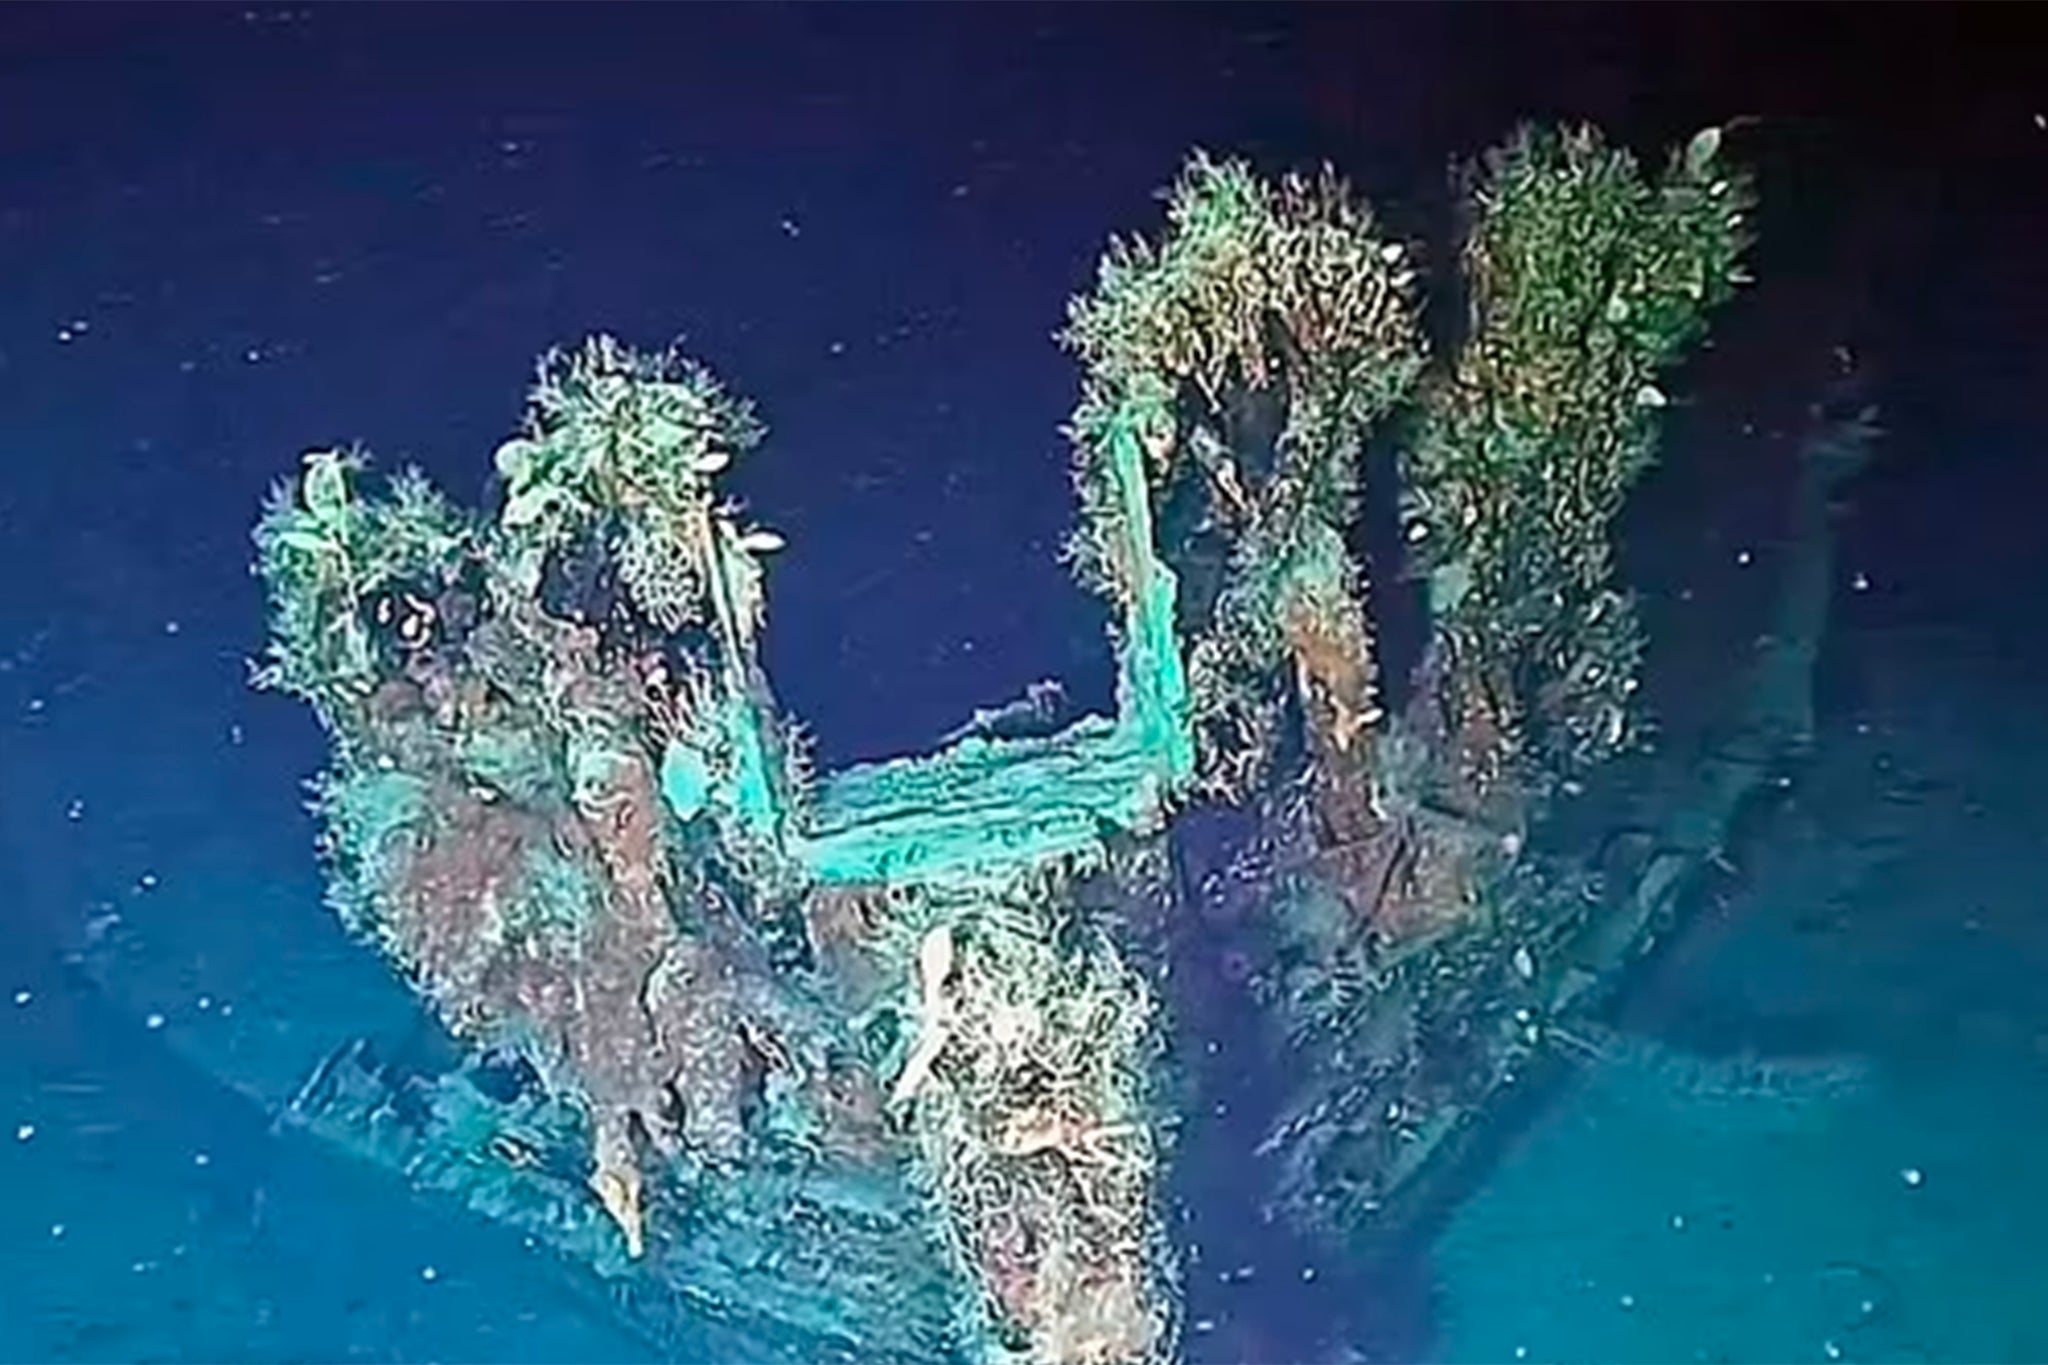 sunken spanish galleon from 1708 could be ‘holy grail of shipwrecks’ with $20bn of treasure